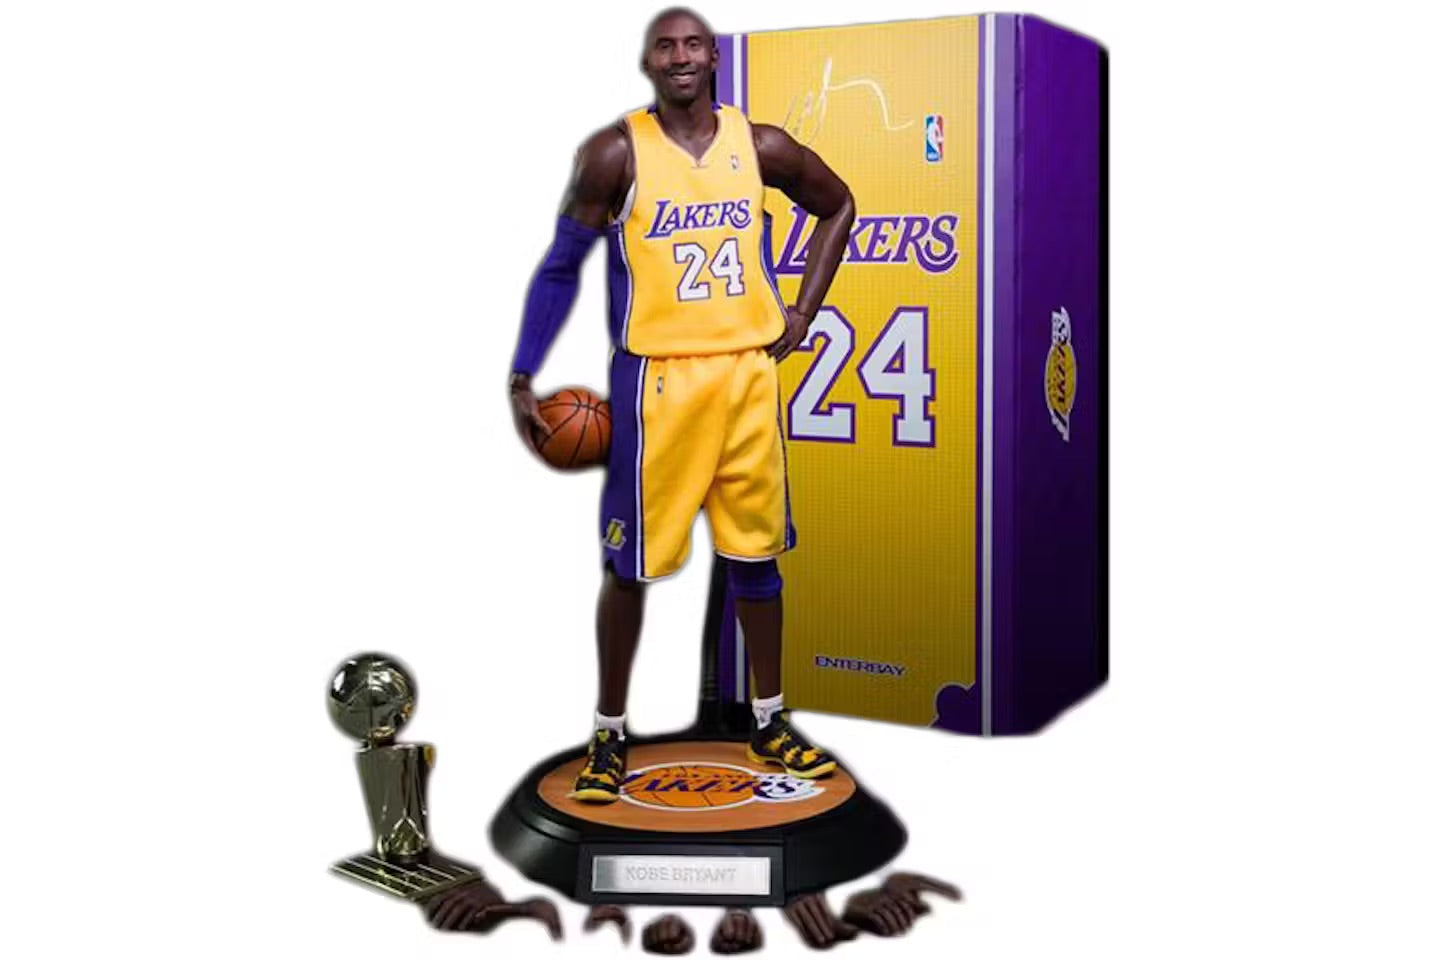 ENTERBAY Relaunches Kobe Bryant Real Masterpiece Series